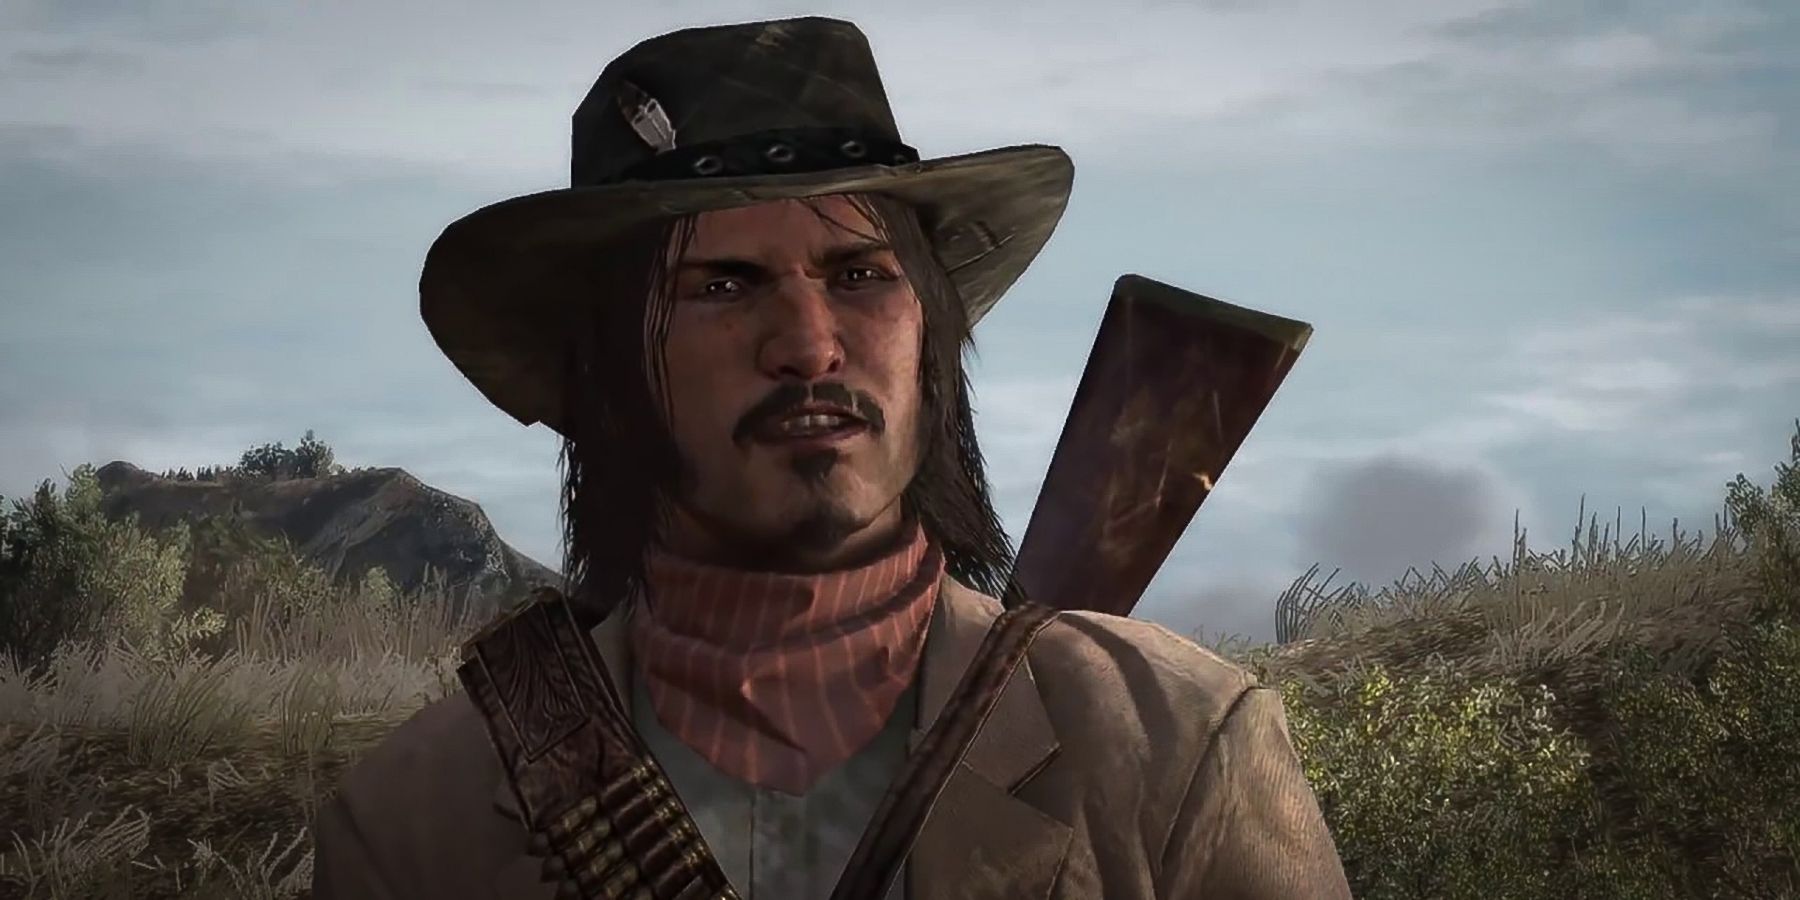 Viral Red Dead Redemption 2 Video Shows Jack Marston 'Imitating